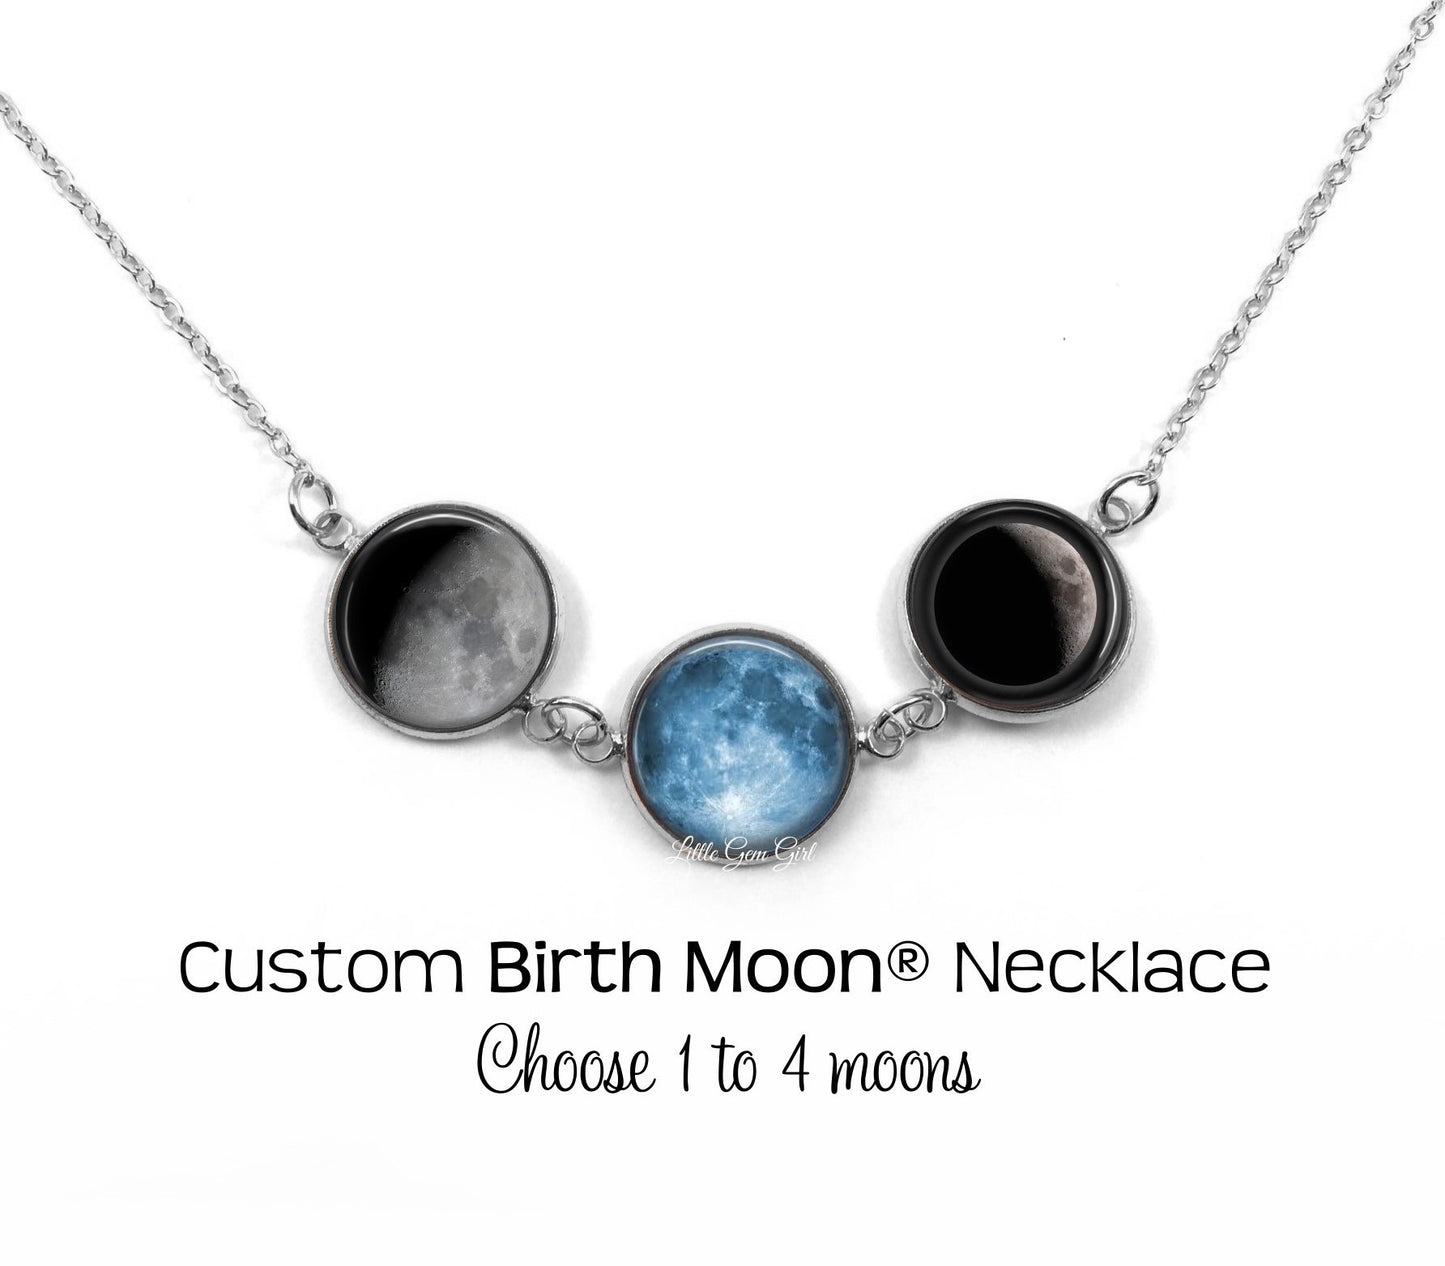 Glow in the Dark Custom Birth Moon Necklace with 1 to 4 Personalized Birthday Moon Charms - Silver Stainless Steel